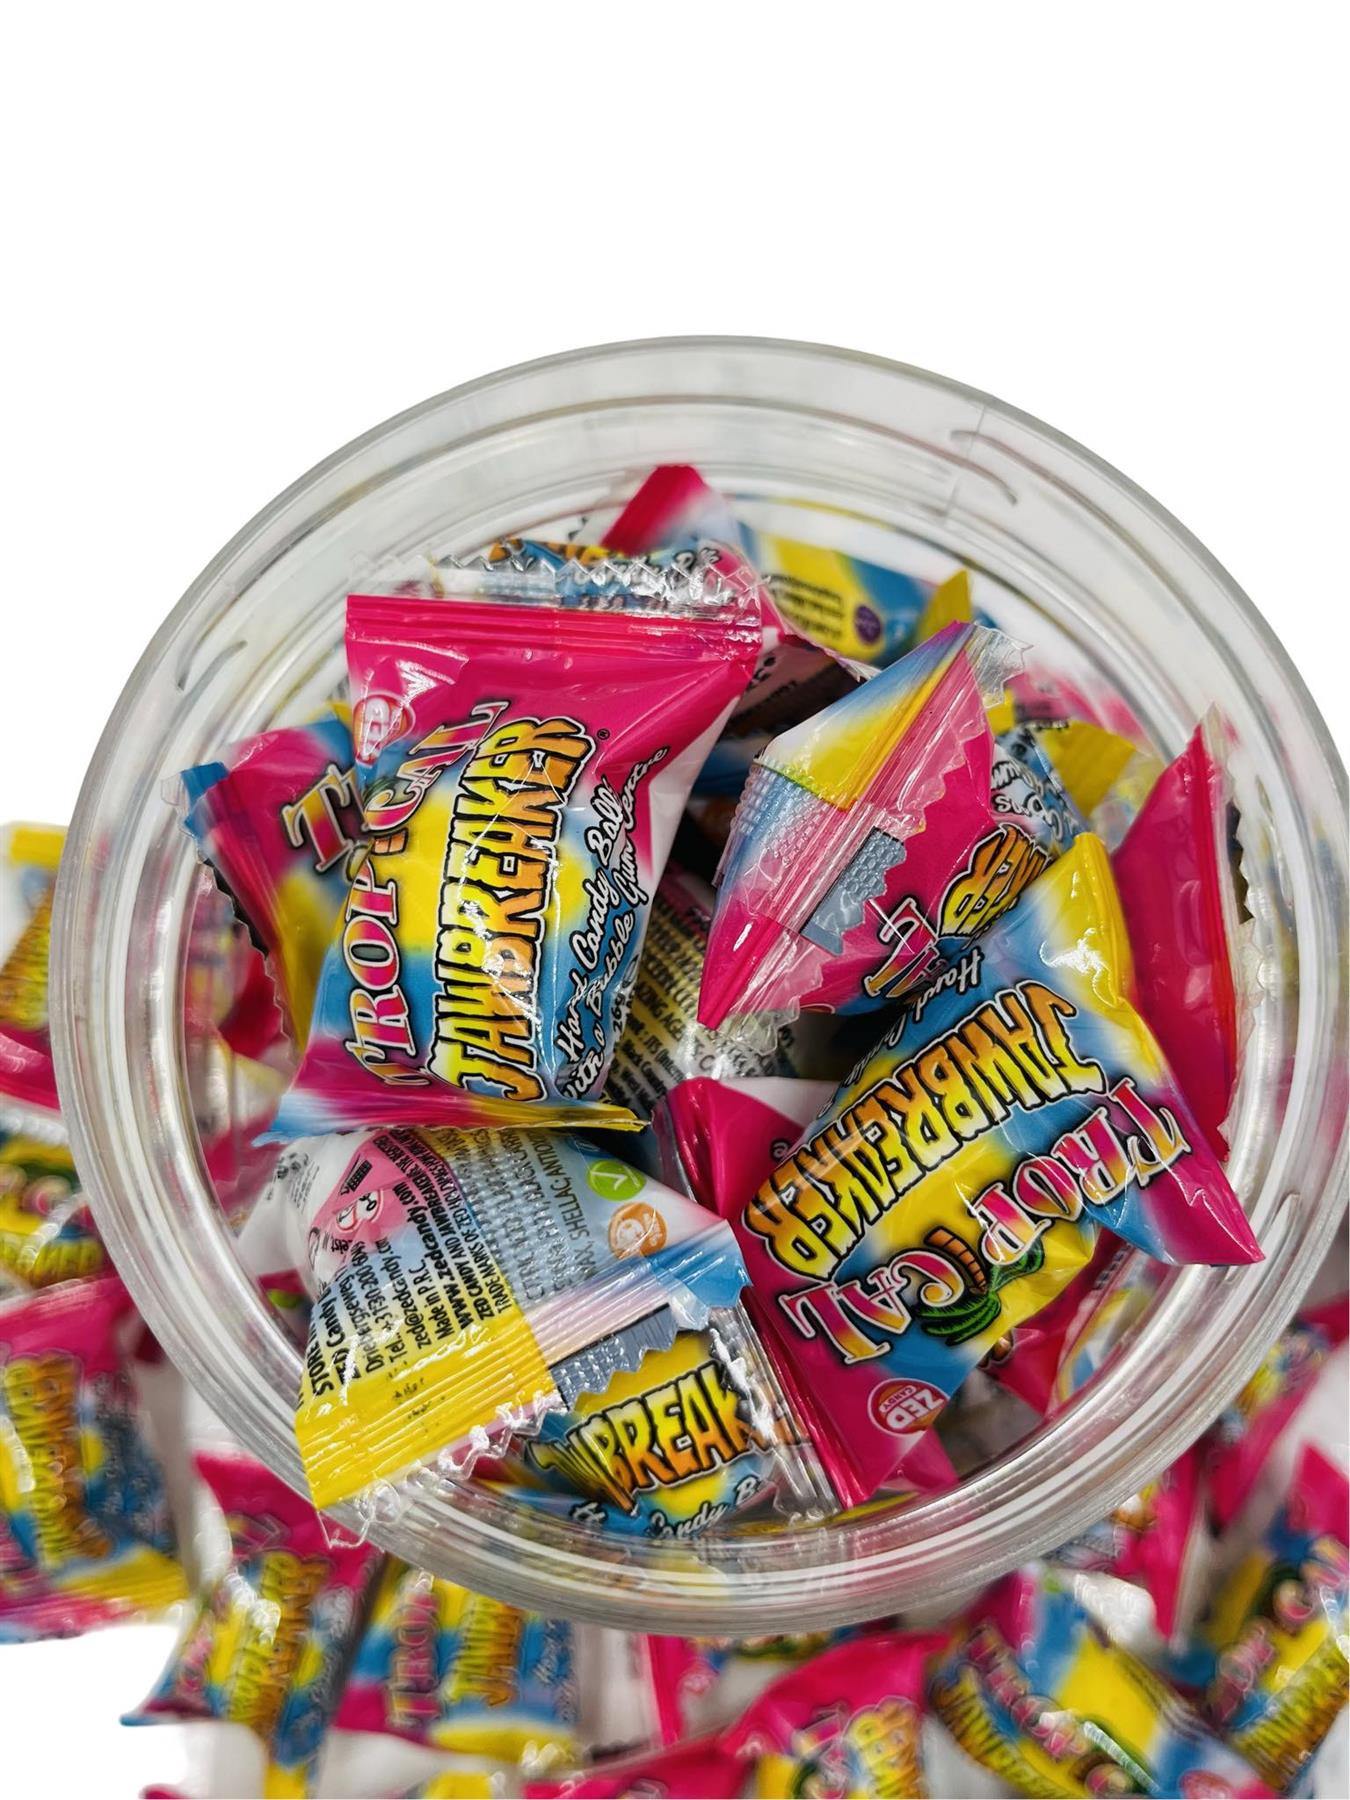 Simway Sweets Jar 440g - Jaw Breakers Tropical - Individually Wrapped Sweets - Approximately 40 Pieces